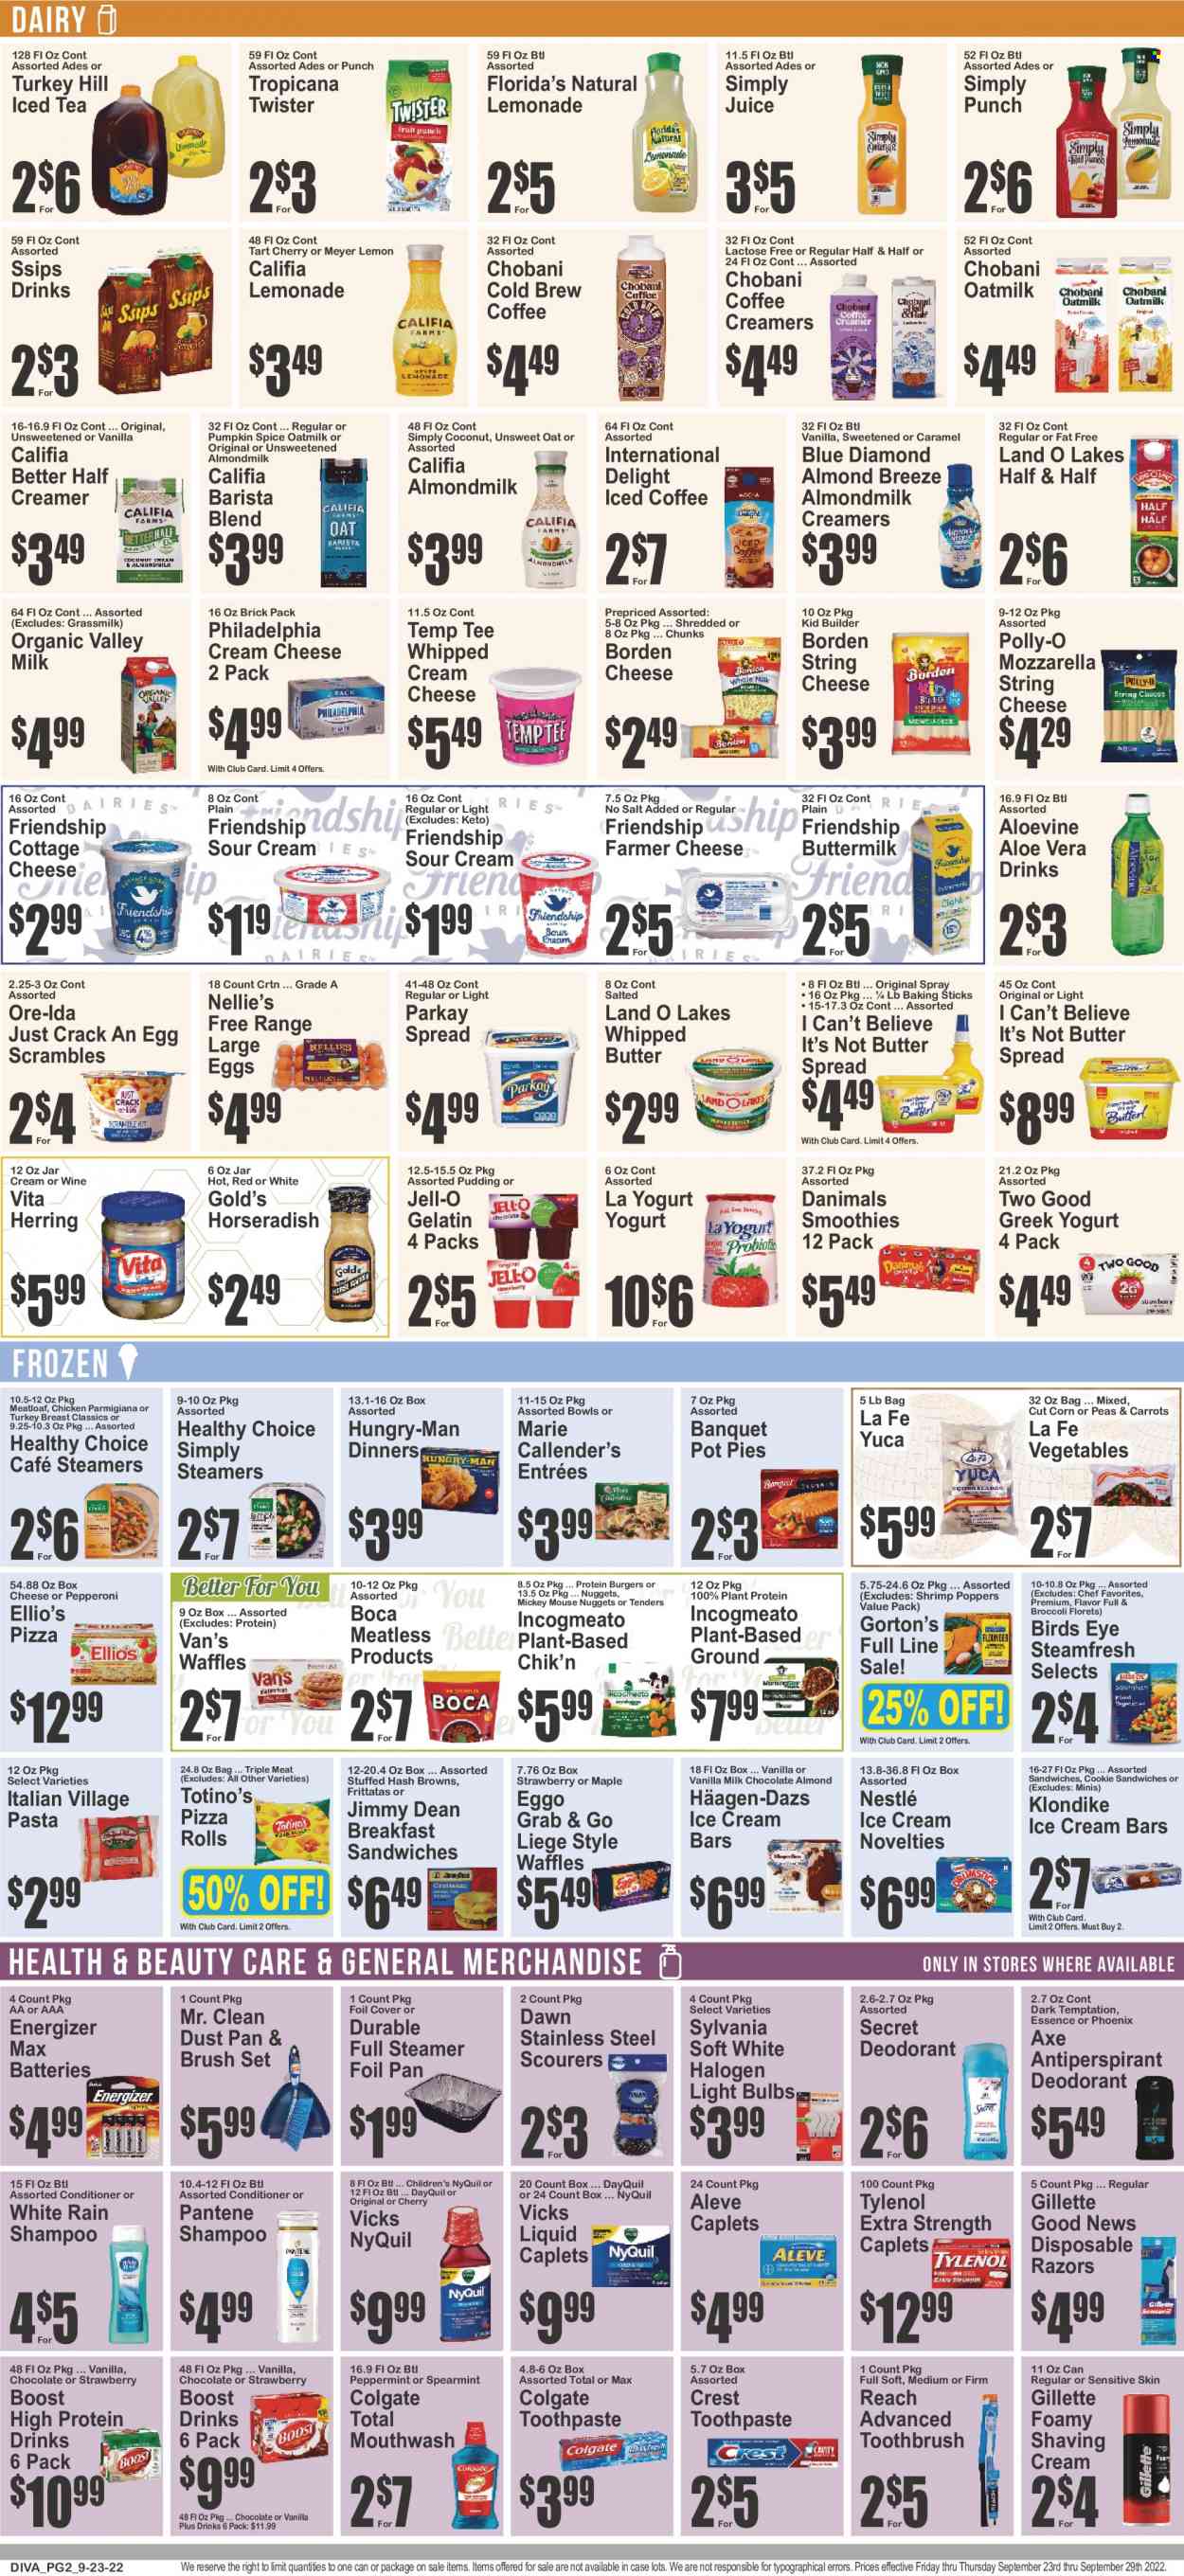 thumbnail - Key Food Flyer - 09/23/2022 - 09/29/2022 - Sales products - pizza rolls, pot pie, waffles, broccoli, carrots, corn, horseradish, herring, shrimps, Gorton's, pizza, nuggets, hamburger, pasta, meatloaf, Bird's Eye, Healthy Choice, Marie Callender's, Jimmy Dean, cottage cheese, farmer cheese, string cheese, Philadelphia, greek yoghurt, pudding, yoghurt, Chobani, Danimals, almond milk, buttermilk, protein drink, Almond Breeze, oat milk, large eggs, whipped butter, I Can't Believe It's Not Butter, sour cream, whipped cream, creamer, ice cream, ice cream bars, Häagen-Dazs, parmigiana, hash browns, Ore-Ida, Nestlé, Florida's Natural, Jell-O, plant protein, spice, Blue Diamond, lemonade, juice, ice tea, Tropicana Twister, smoothie, iced coffee, Boost, wine, turkey breast, shampoo, Colgate, toothbrush, toothpaste, mouthwash, Crest, conditioner, Pantene, anti-perspirant, deodorant, Axe, Gillette, disposable razor, Vicks, dustpan & brush, battery, bulb, Energizer, light bulb, Sylvania, Aleve, DayQuil, Tylenol, NyQuil, Half and half. Page 3.